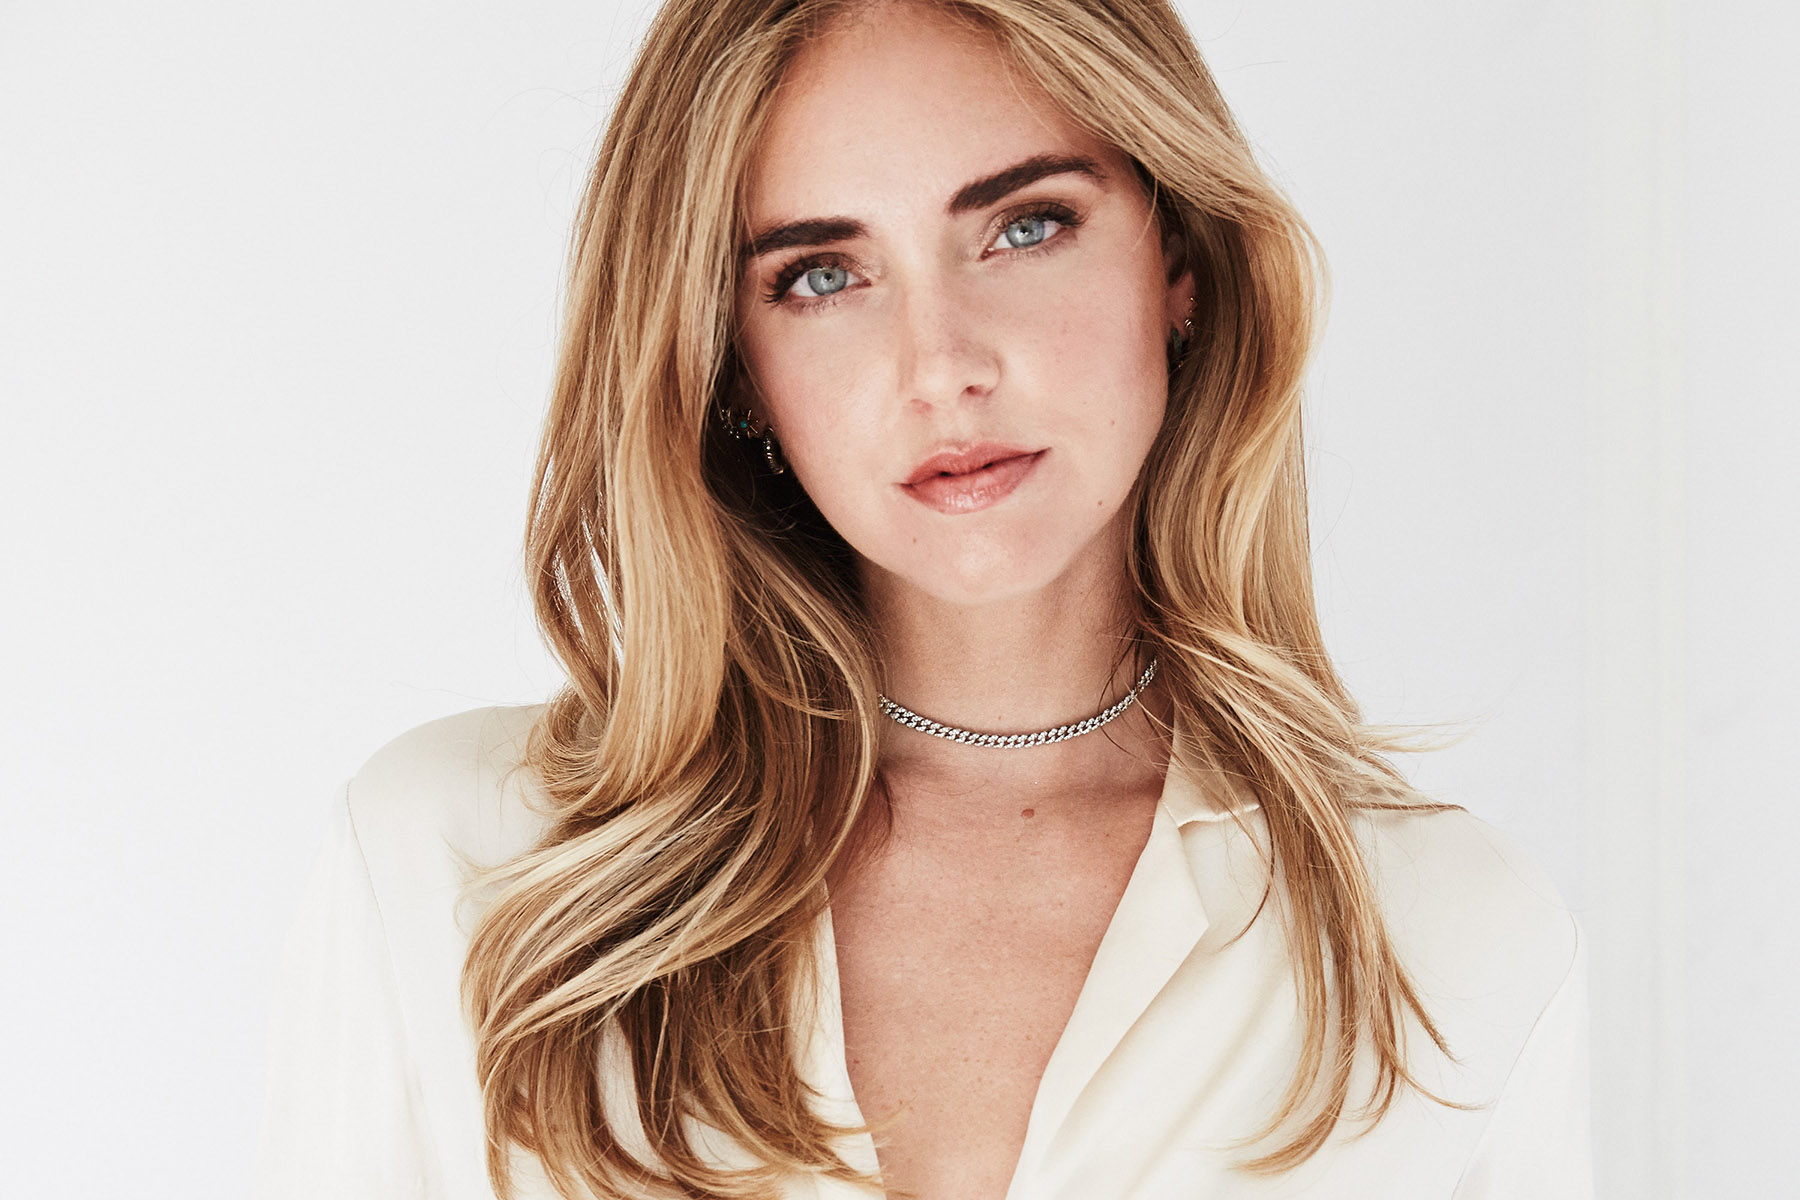 Chiara Ferragni may be first to launch IPO with influencer business model